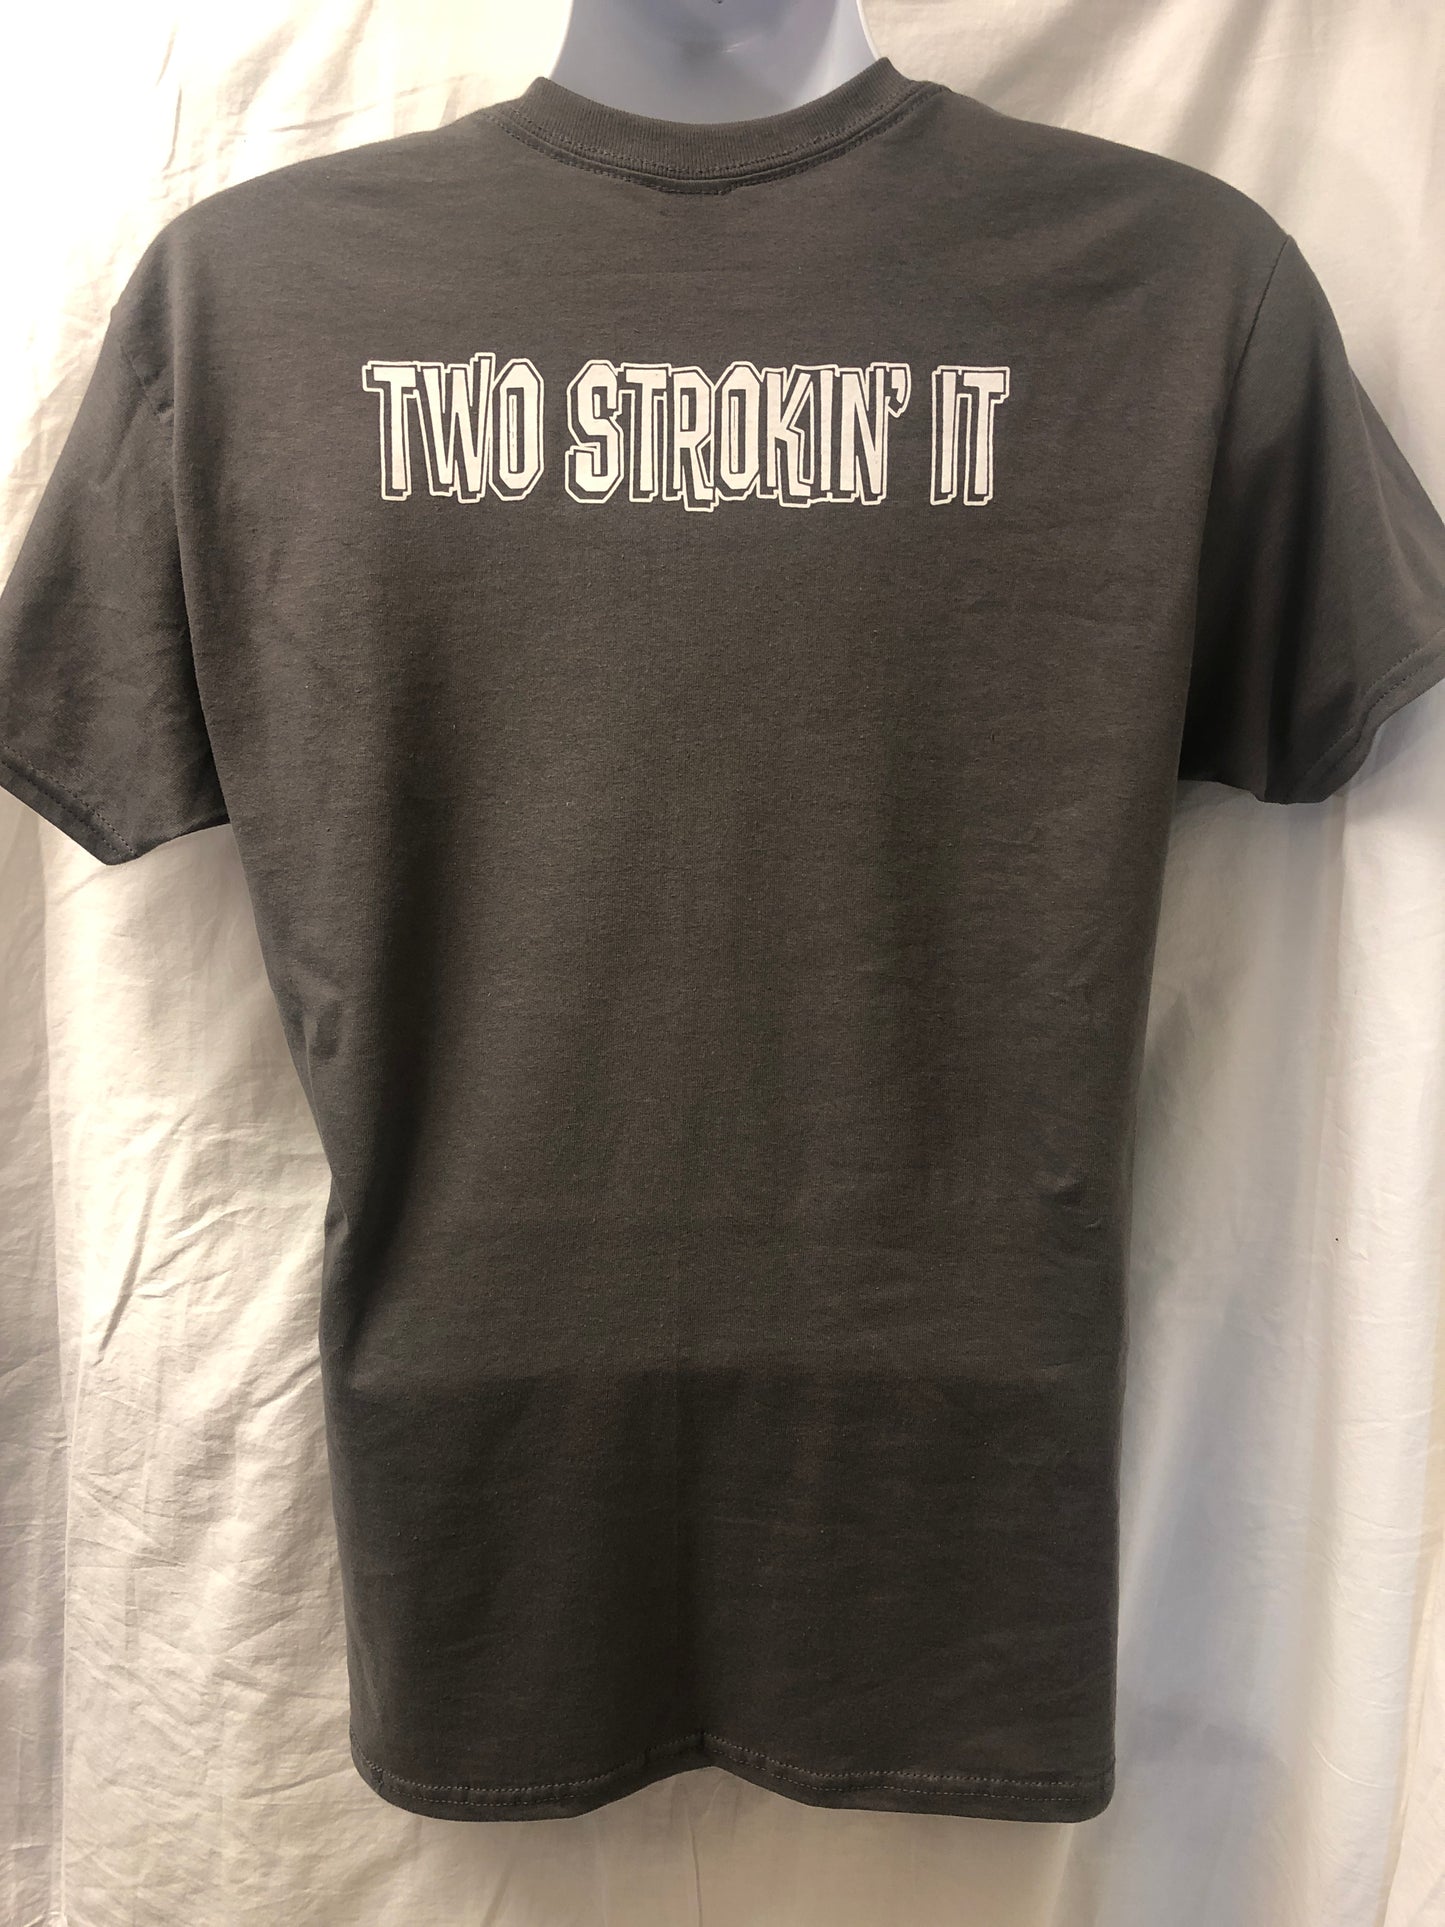 Two Strokin' It - Oi! and Logo Short Sleeve T-shirt